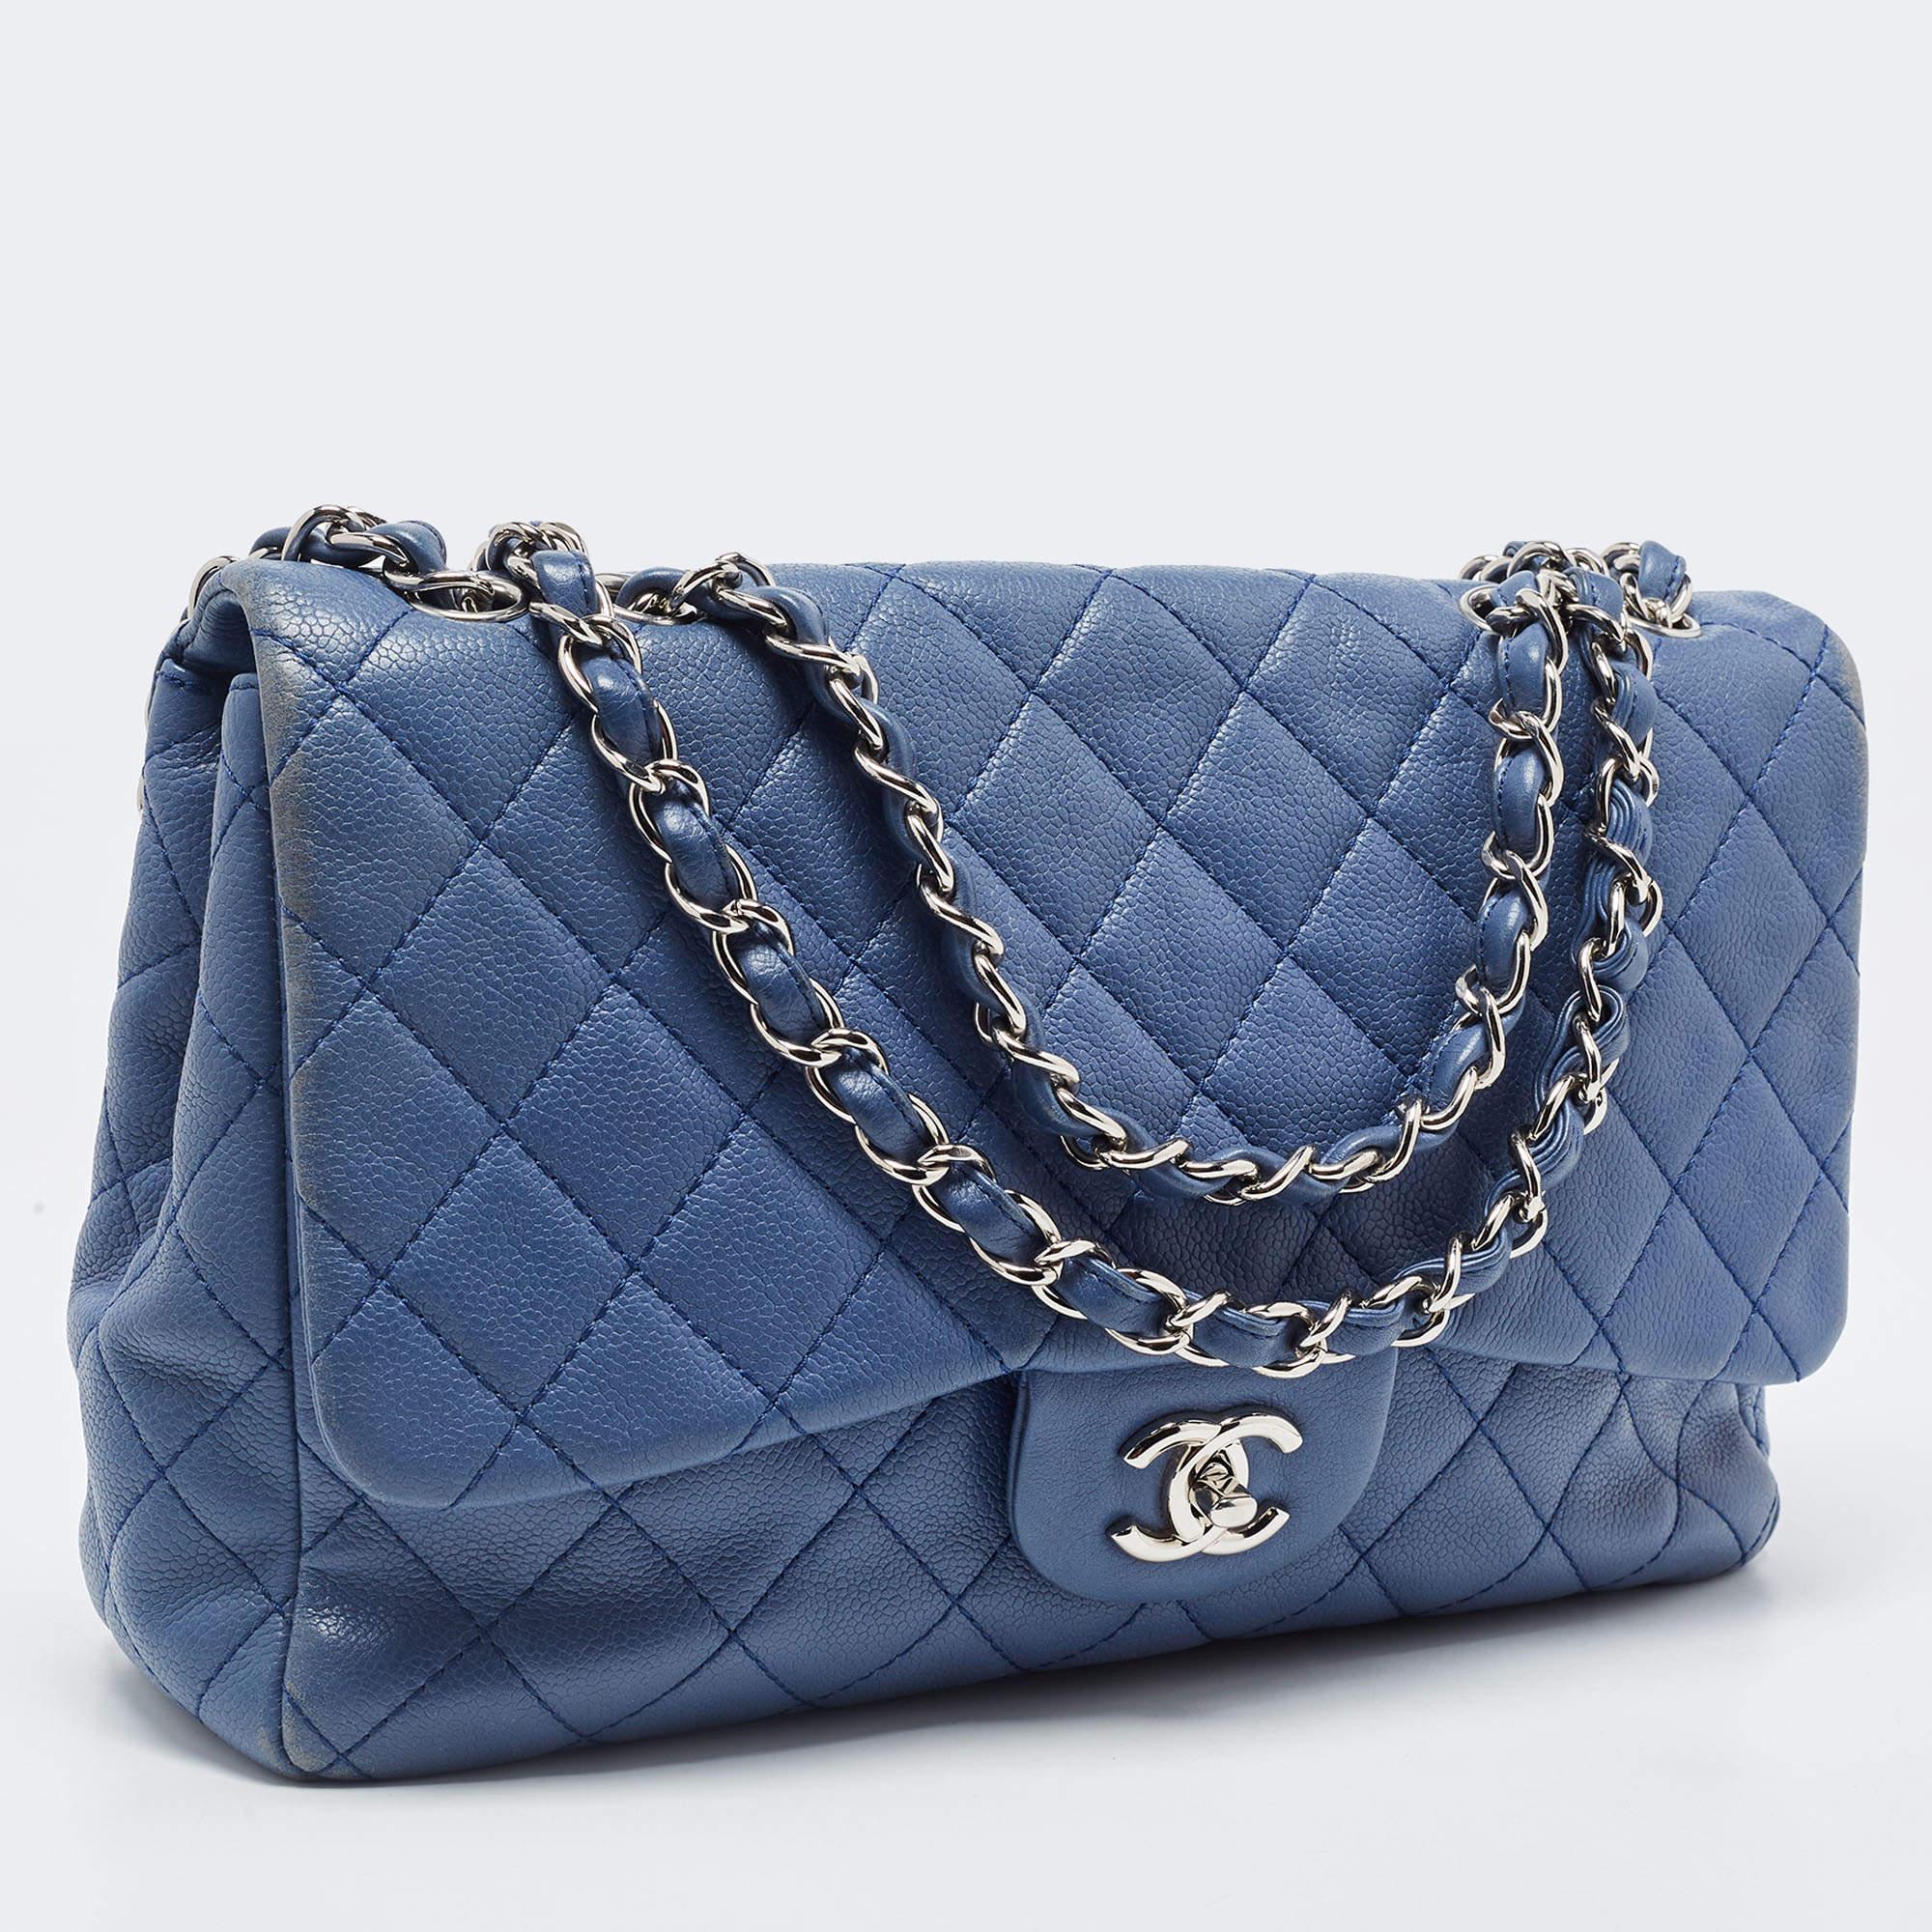 Chanel Blue Quilted Caviar Leather Jumbo Classic Single Flap Bag In Good Condition For Sale In Dubai, Al Qouz 2